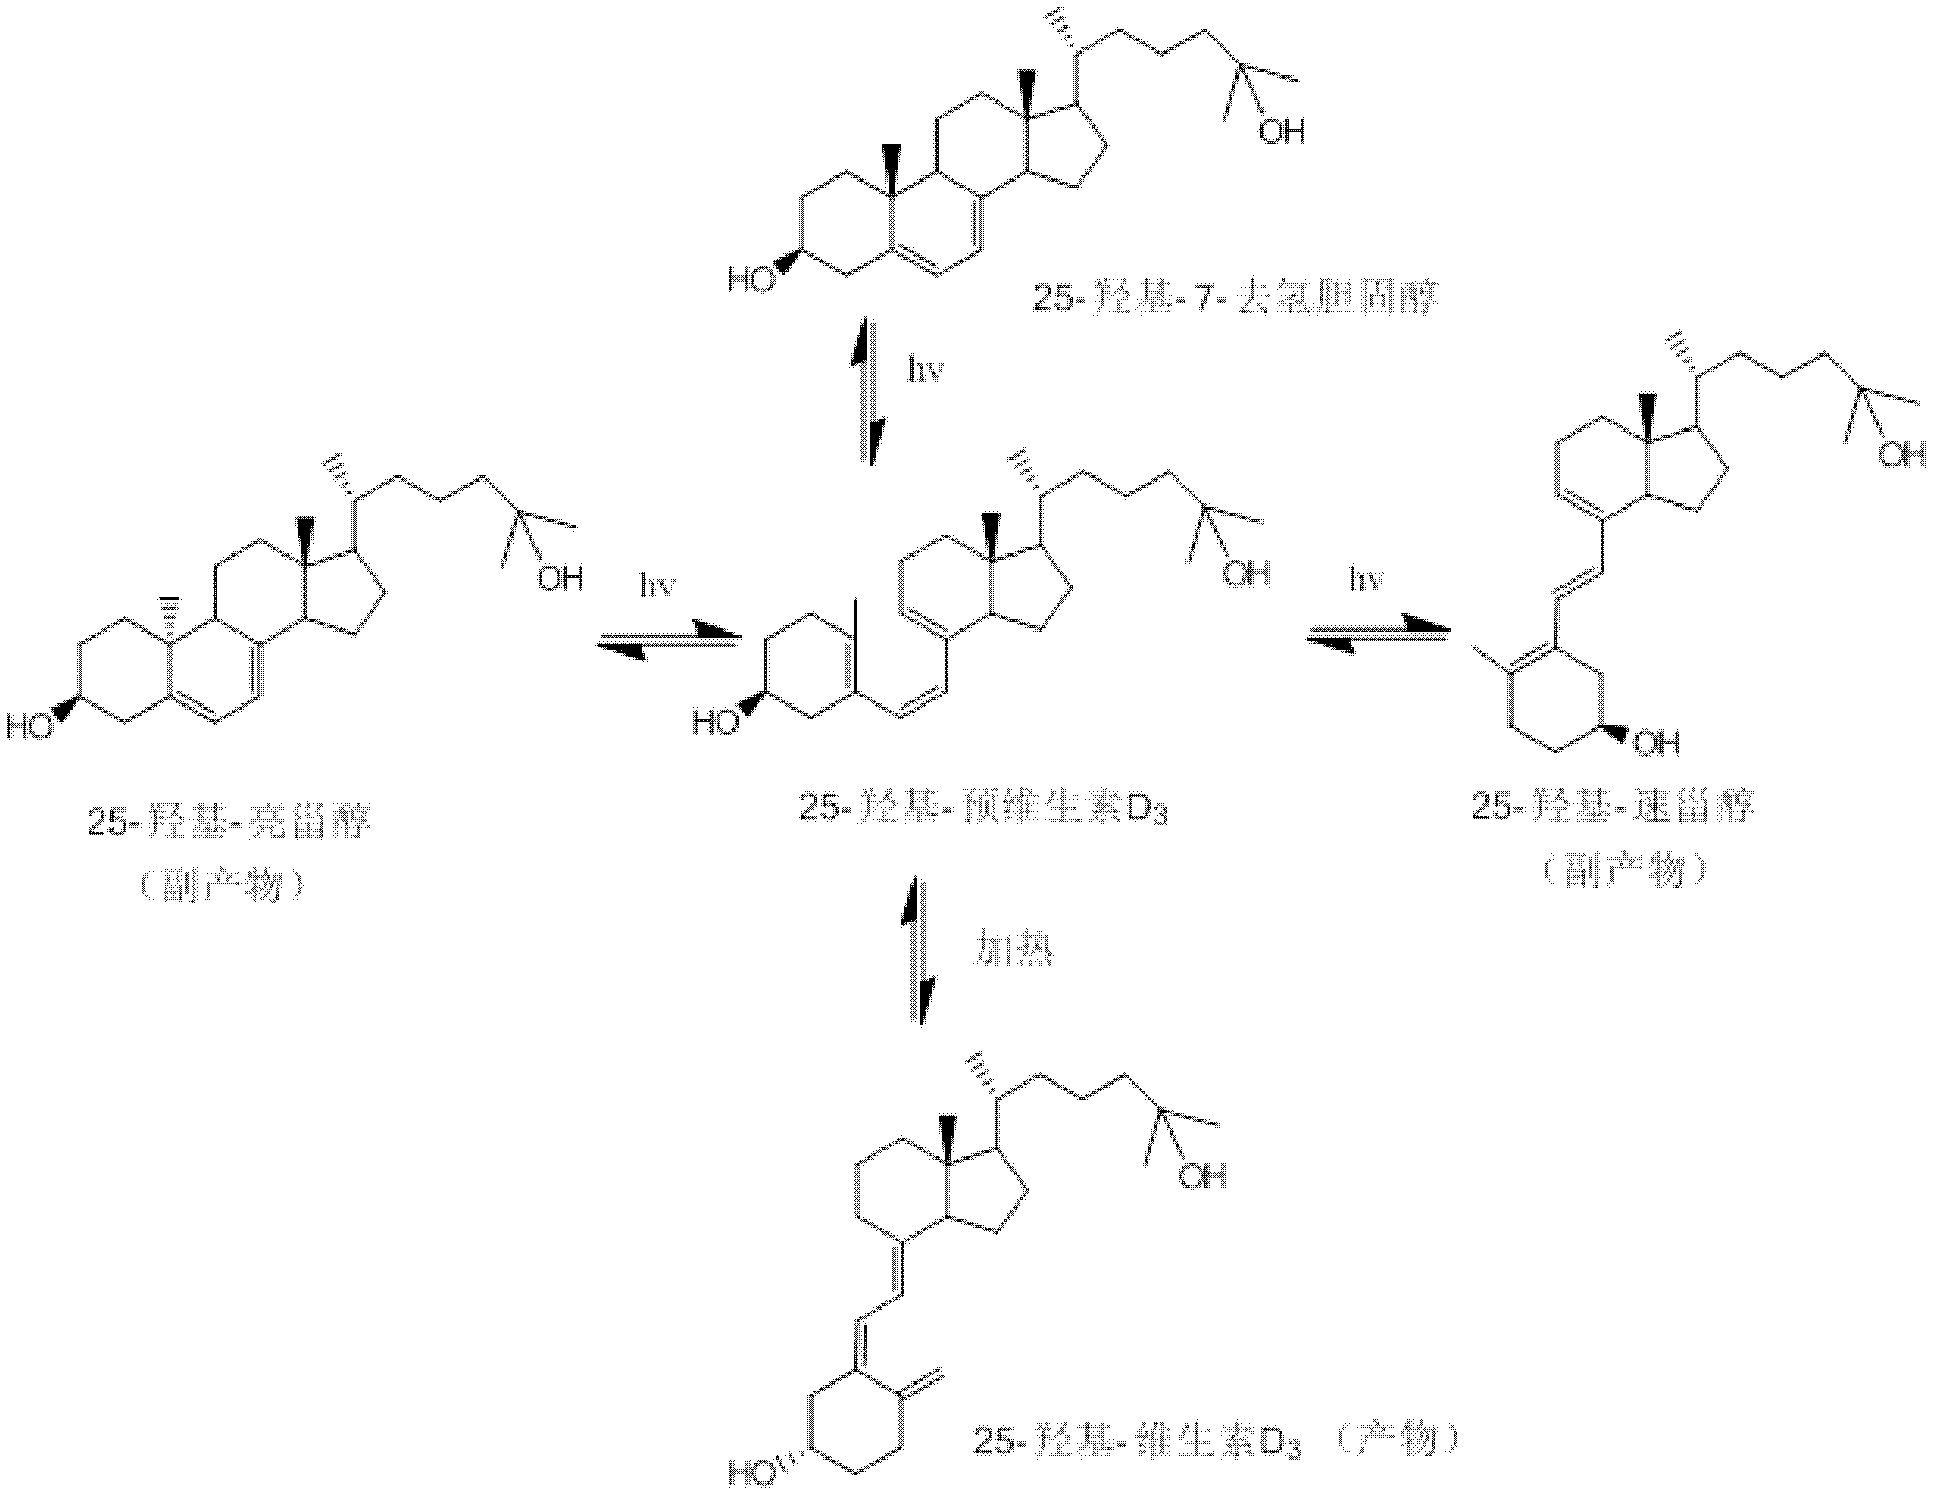 Photochemical synthesis method of 25-hydroxy vitamin D3